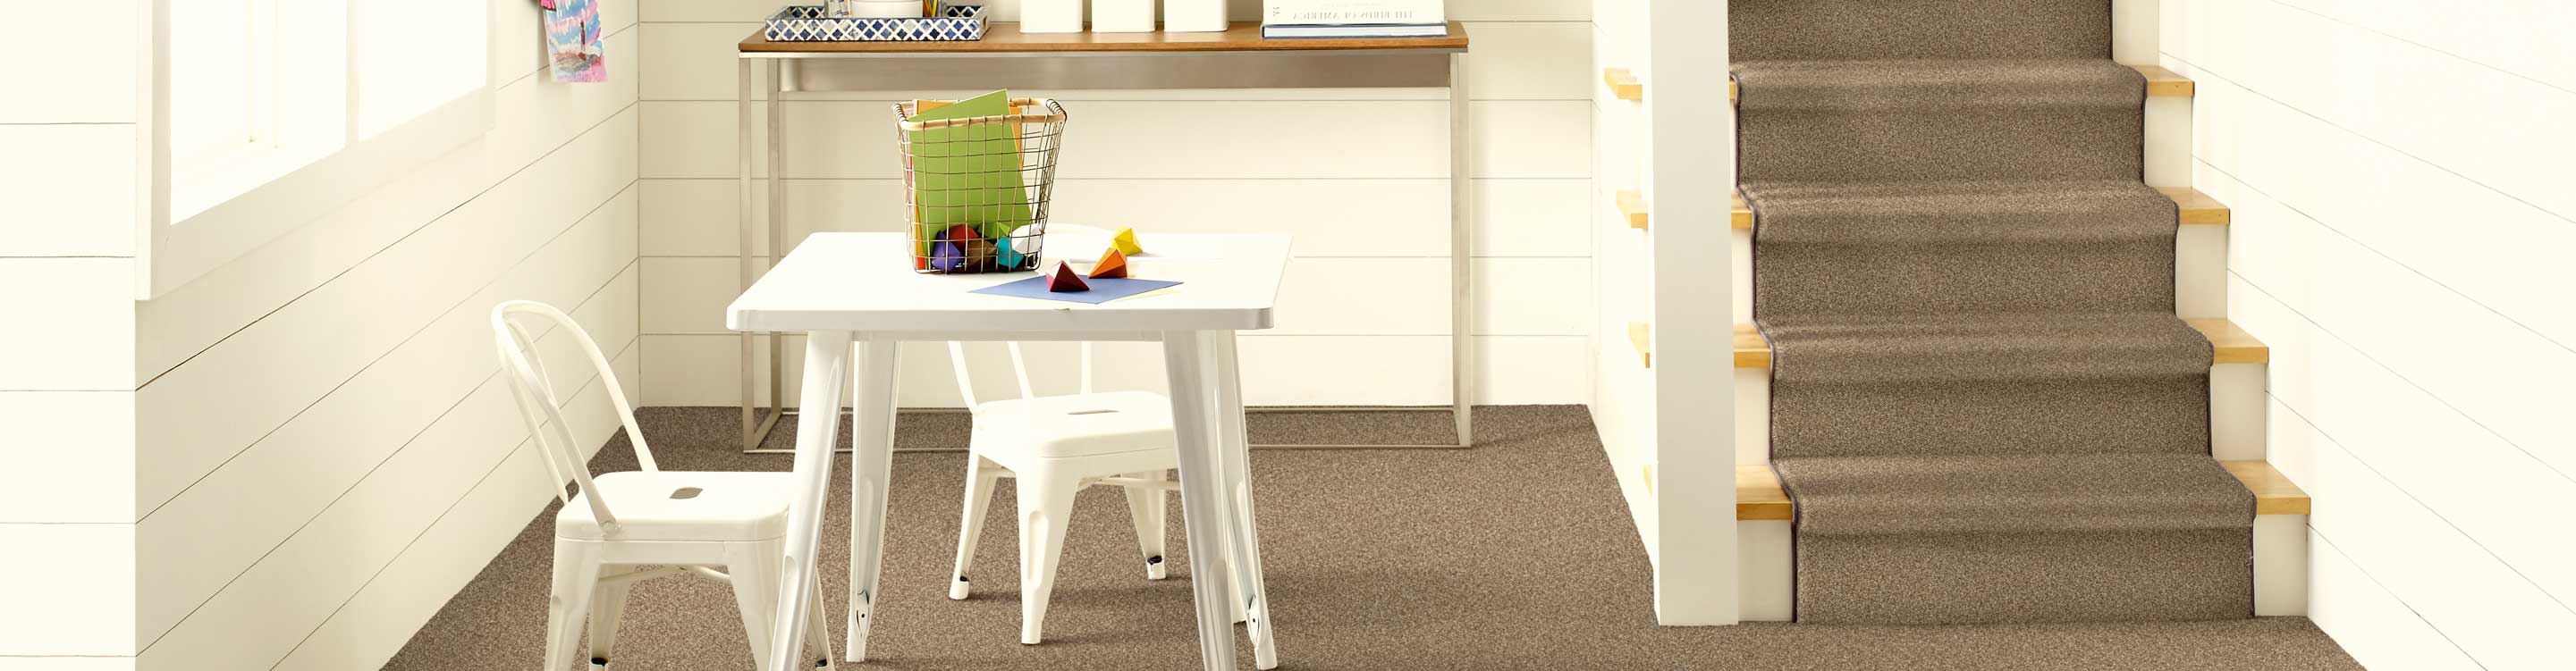 brown neutral carpet stair runner in living area and kids playroom